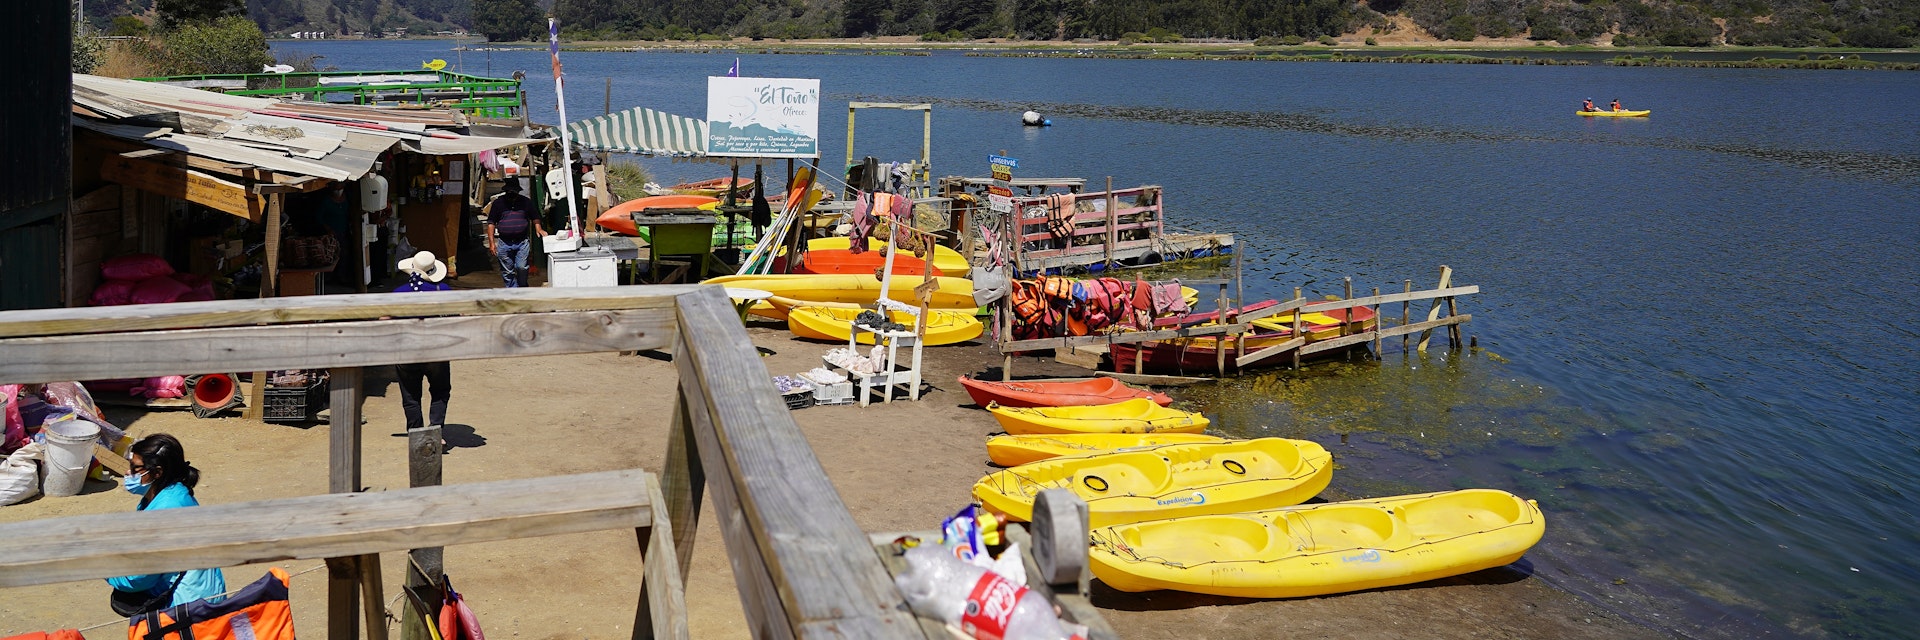 View of the laguna and tourist boats on summer day in Cahuil, Pichilemu, Chile.